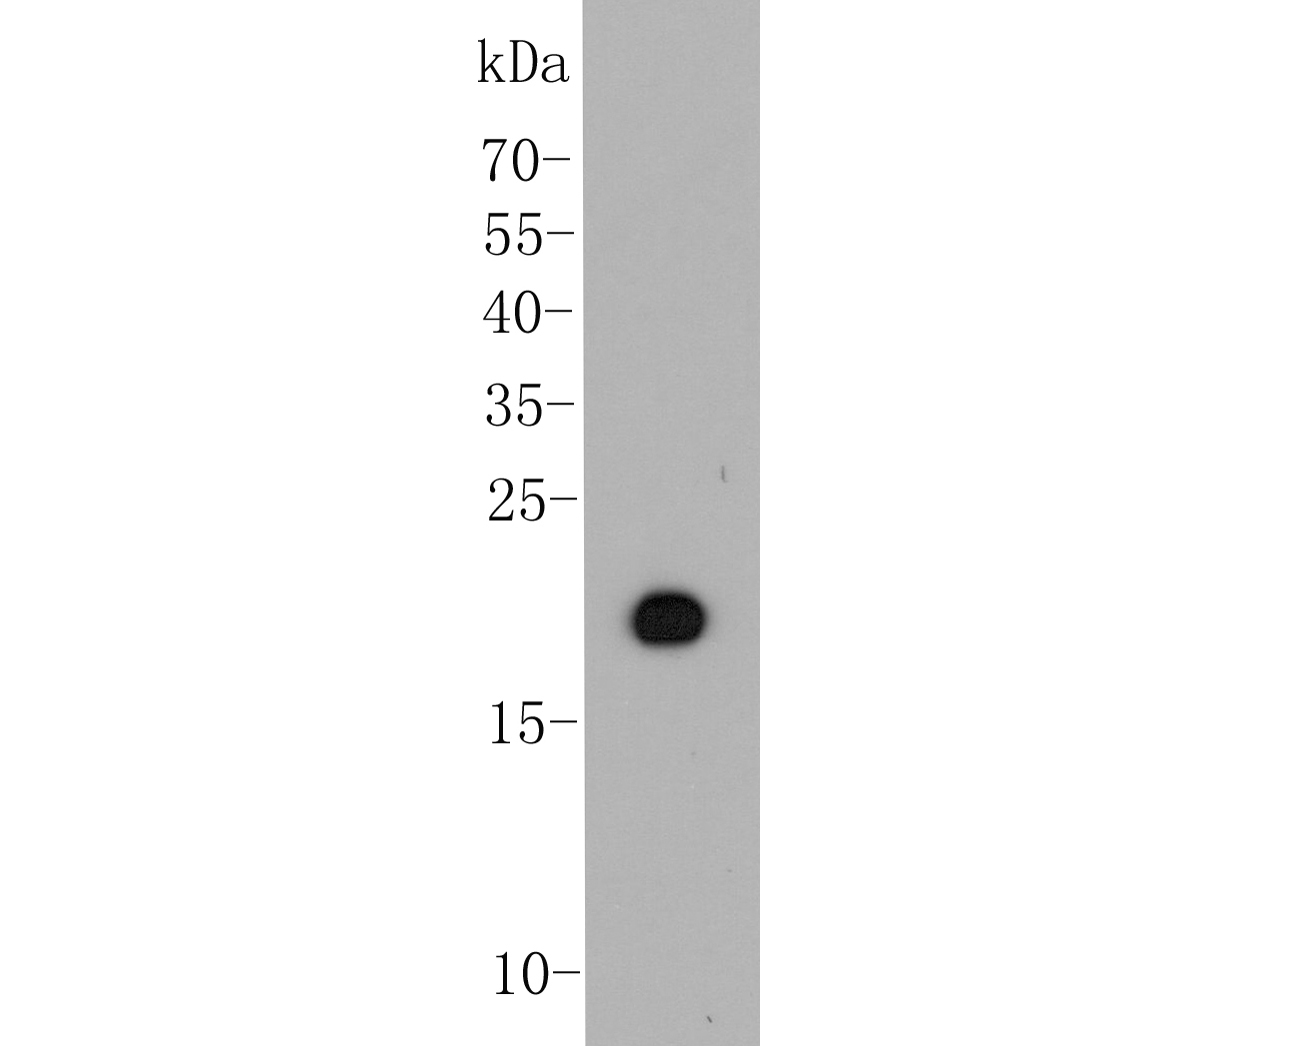 Western blot analysis of p15 INK4b on recombinant protein. Proteins were transferred to a PVDF membrane and blocked with 5% BSA in PBS for 1 hour at room temperature. The primary antibody (ER1901-75, 1/1,000) was used in 5% BSA at room temperature for 2 hours. Goat Anti-Rabbit IgG - HRP Secondary Antibody (HA1001) at 1:5,000 dilution was used for 1 hour at room temperature.